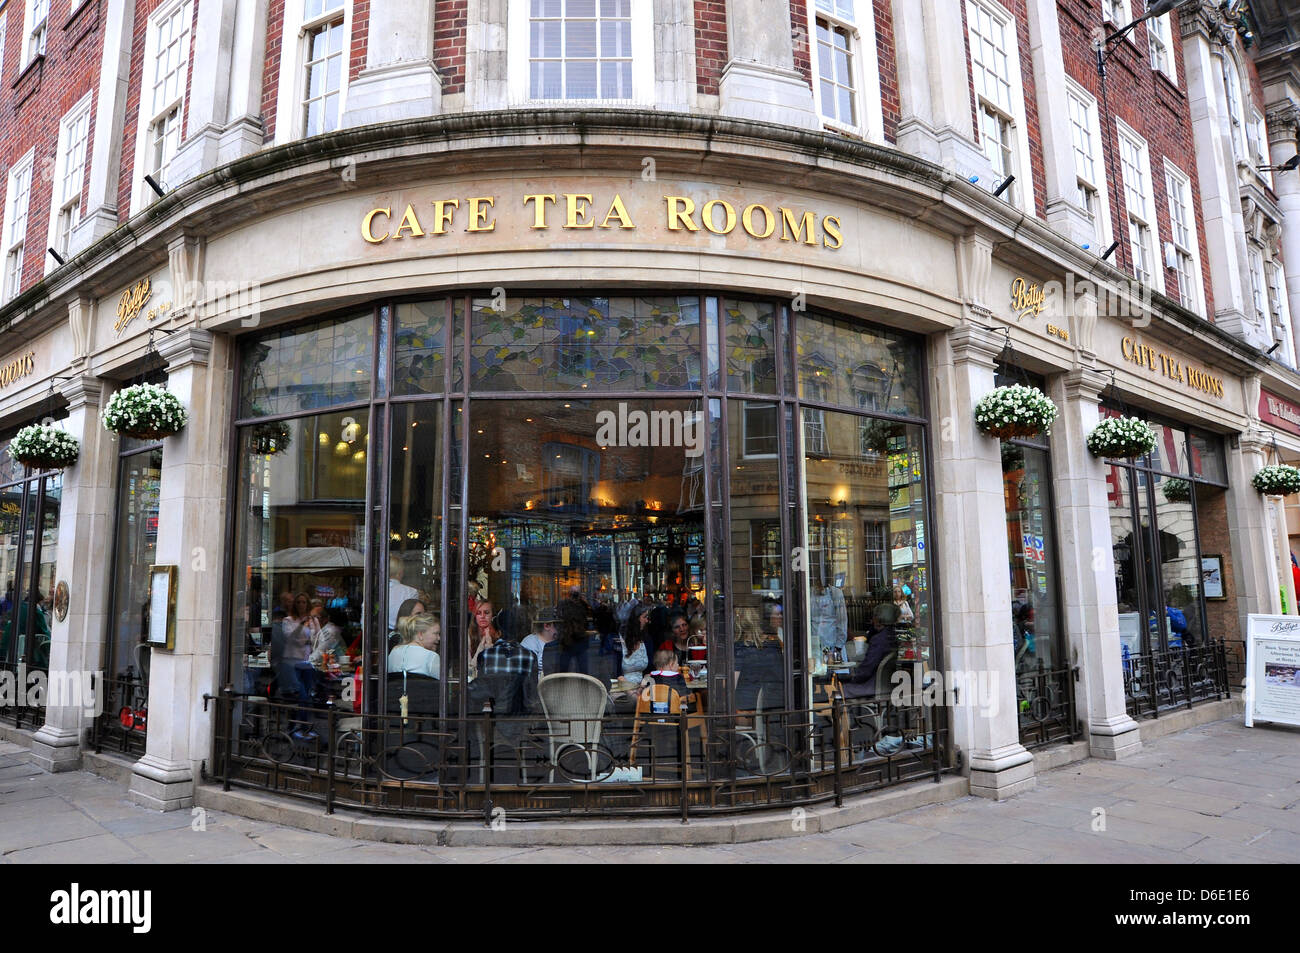 Bettys Cafe Tea Rooms at York Yorkshire UK Stock Photo